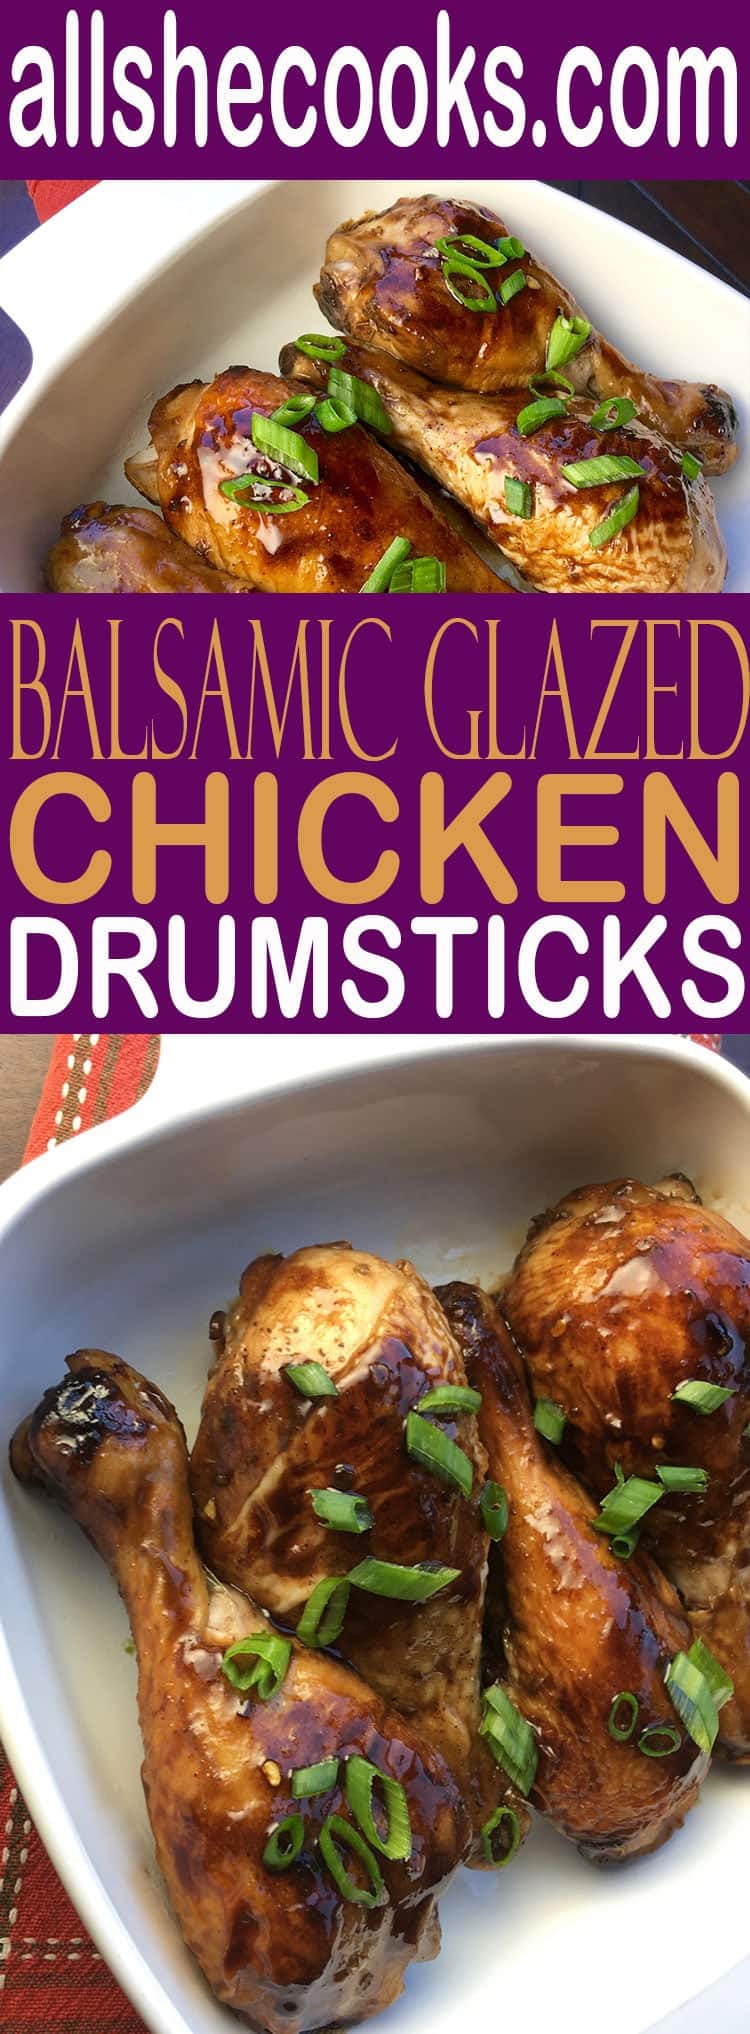 Blasamic Glazed Chicken Drumsticks is one of the easiest and tastiest inexpensive chicken recipes that you can make for dinner tonight. This is a simple recipe that is perfect for even a novice to master on the first try. You will love it.